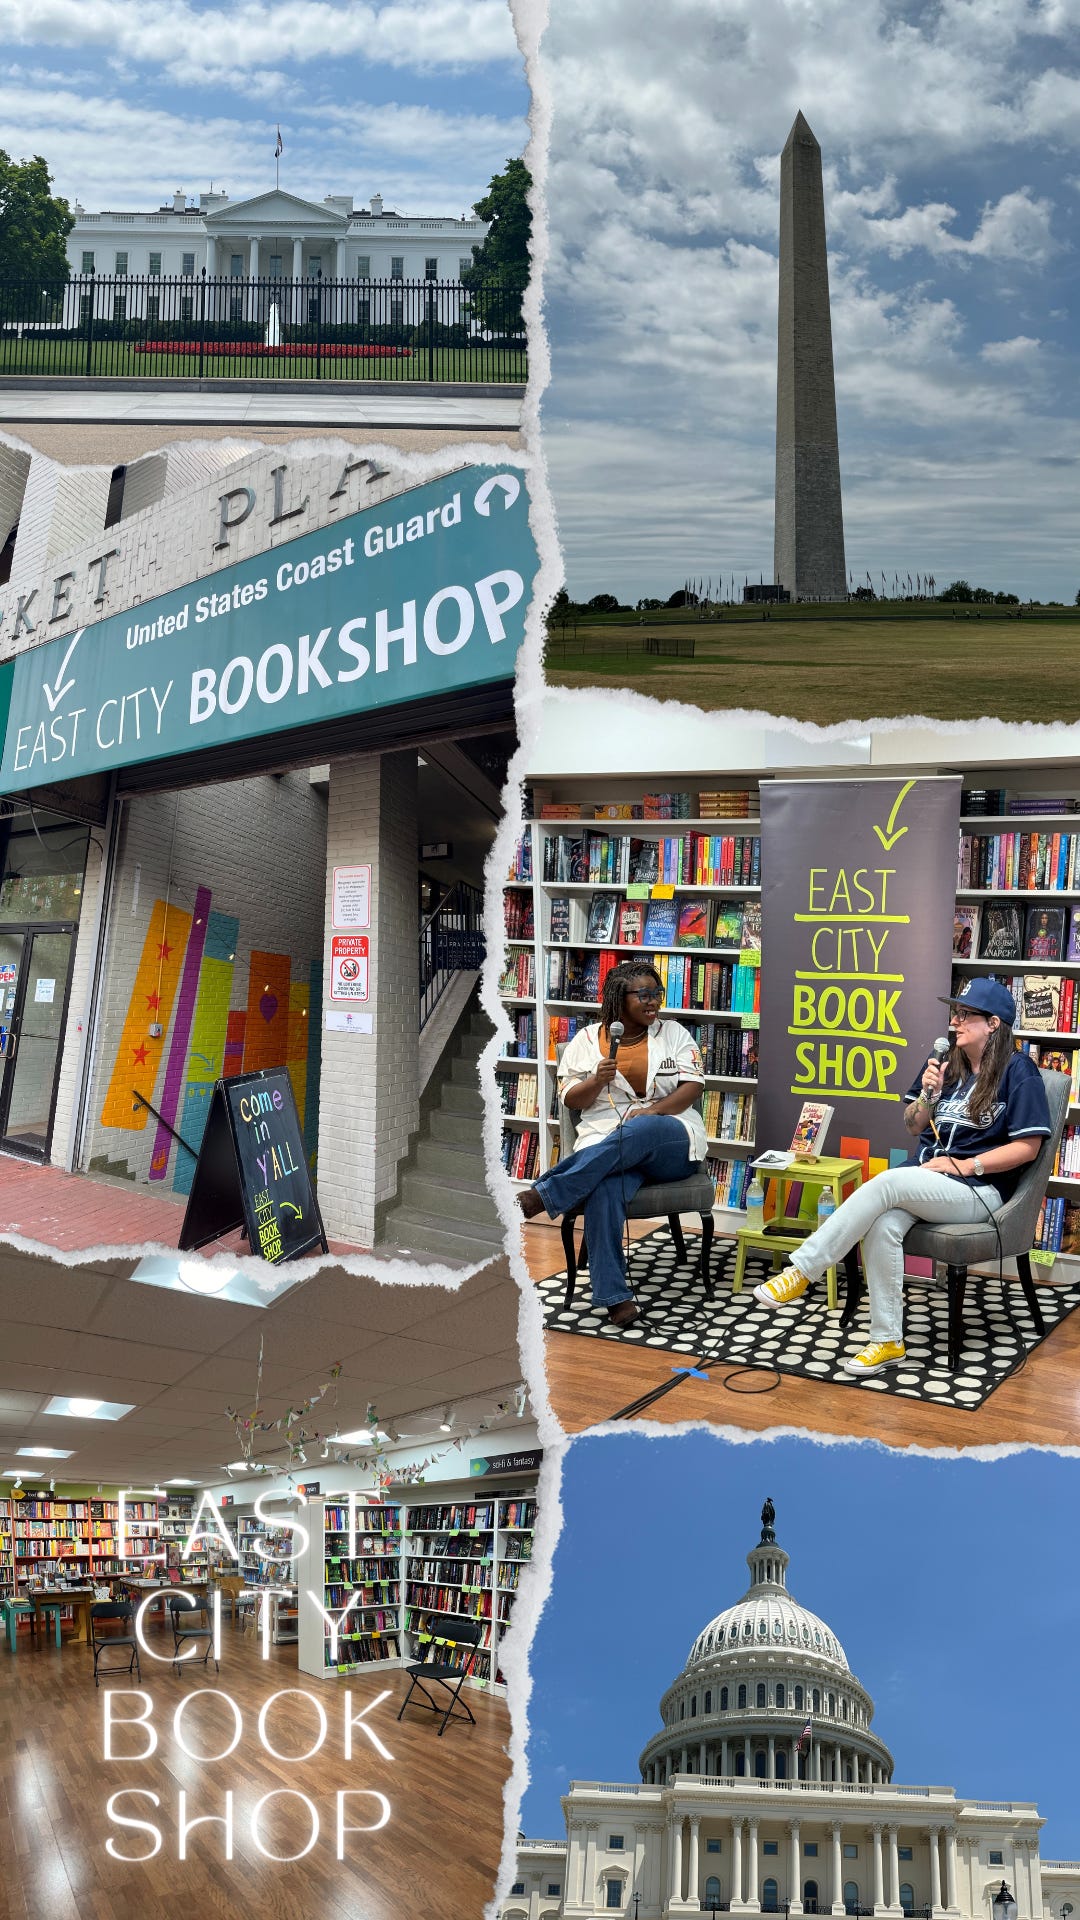 Collage of images where top left is the White House, top right is the Washington Monument, center left is the outside of East City Book Shop, Center right is me and Nikki Payne in conversation, bottom left is an image of the inside of East City with "EAST CITY BOOK SHOP" written over it in text, and bottom right is the Capitol Building.